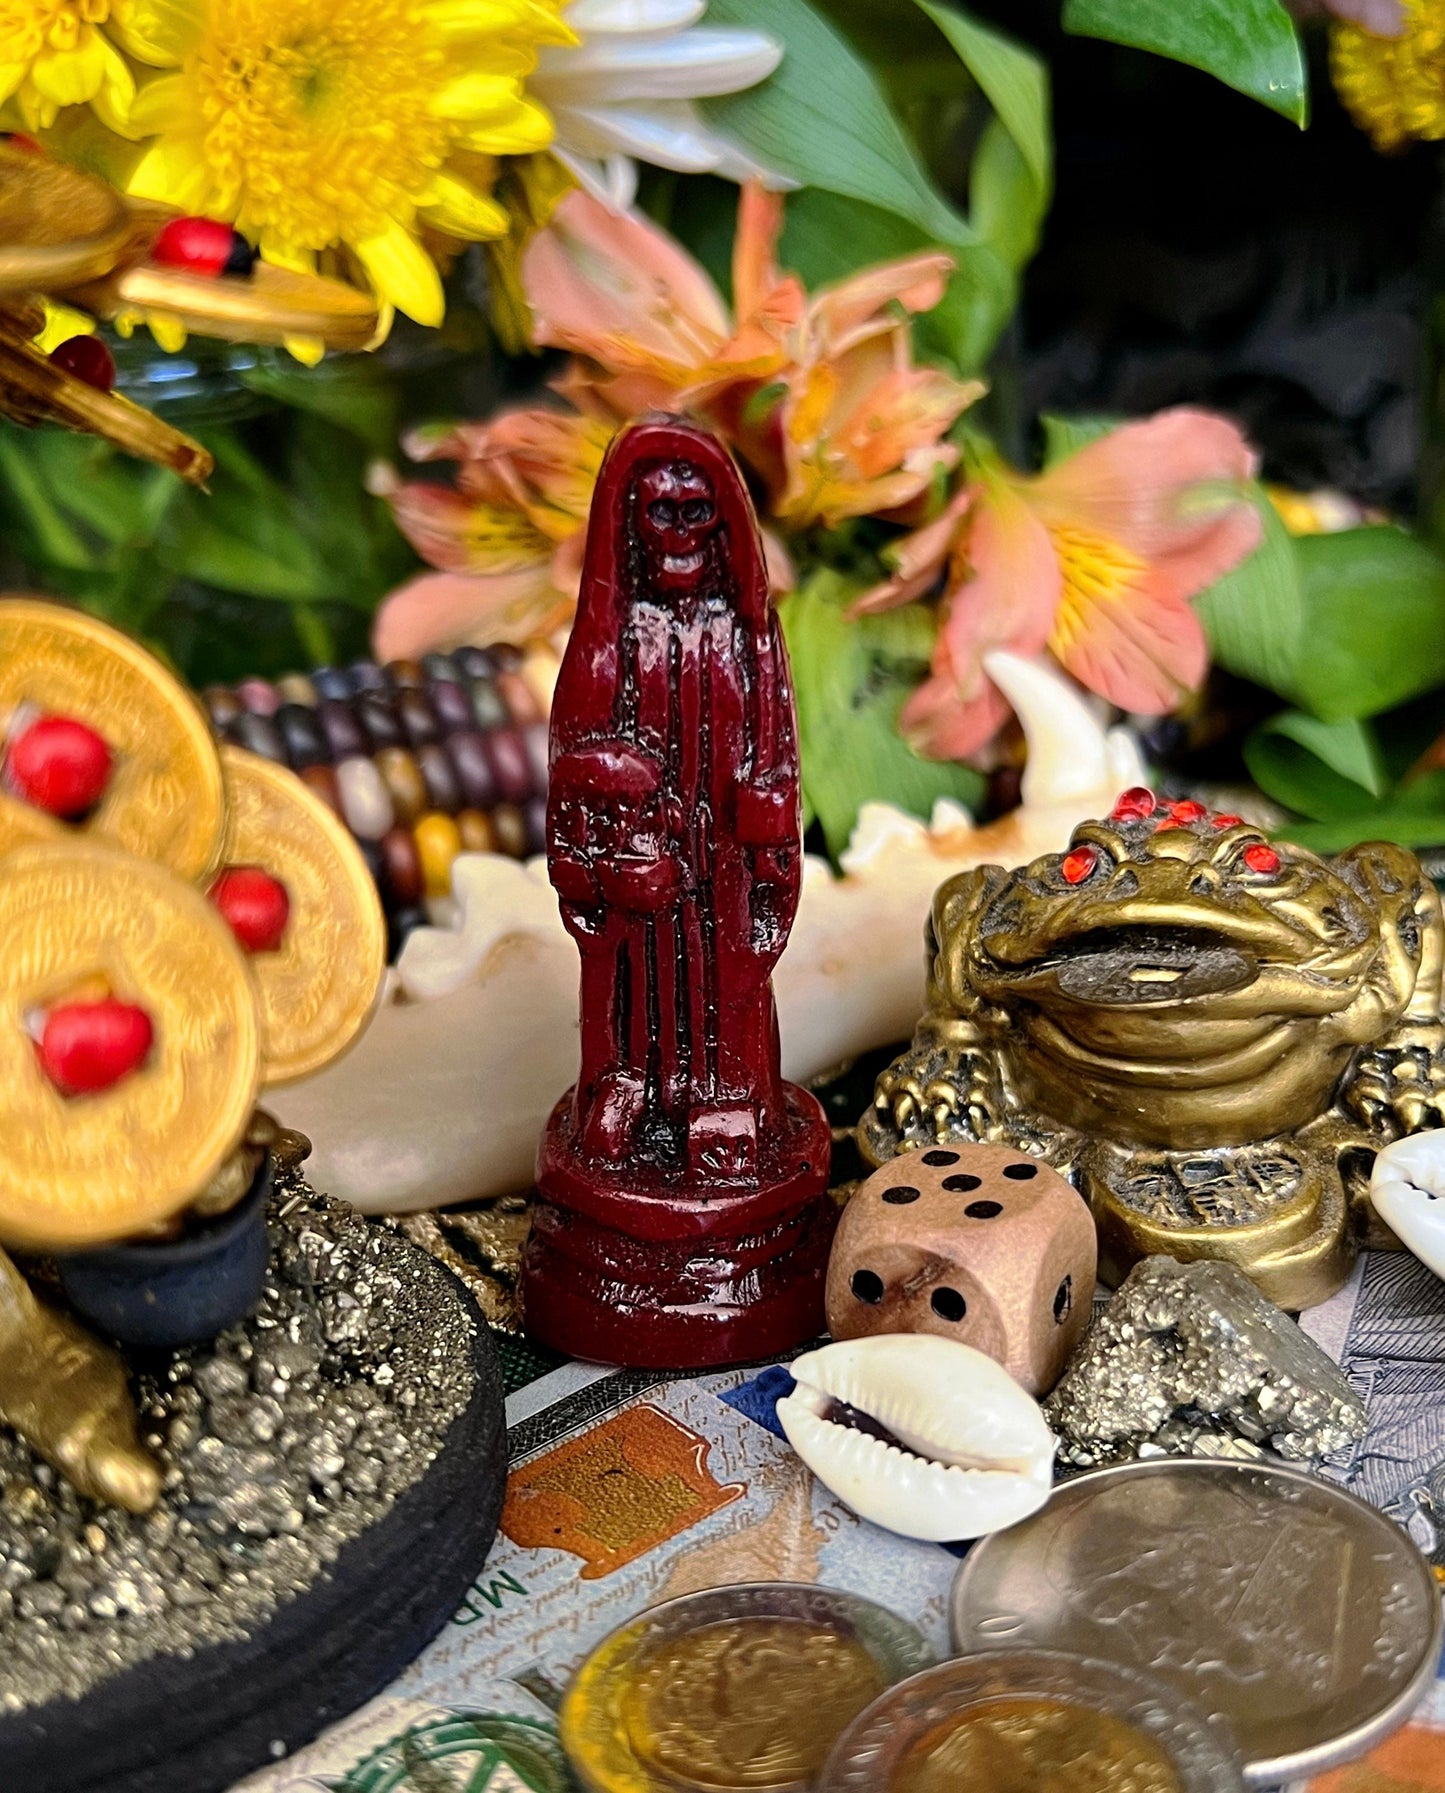 Santa Muerte Statuettes 3” + Blessed + Fixed + Made in Mexico